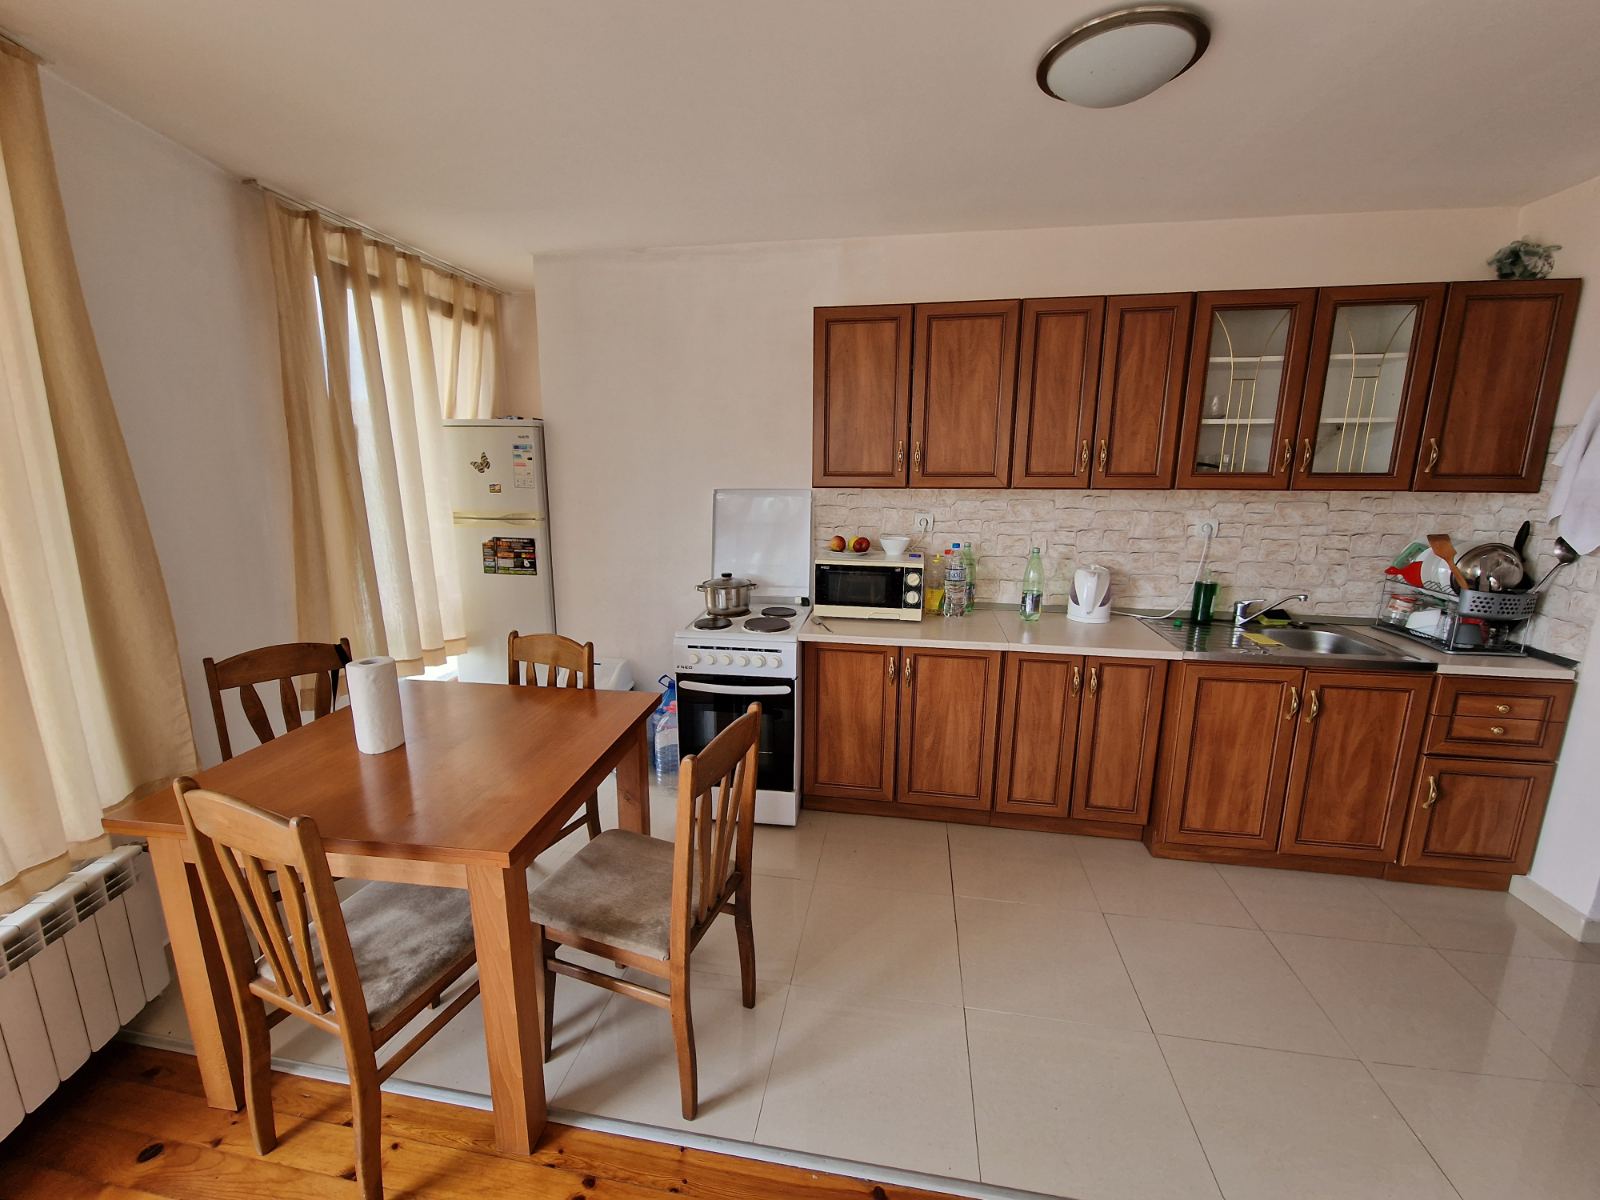 Spacious apartment with two bedrooms and a parking space in a well-maintained complex in Bansko